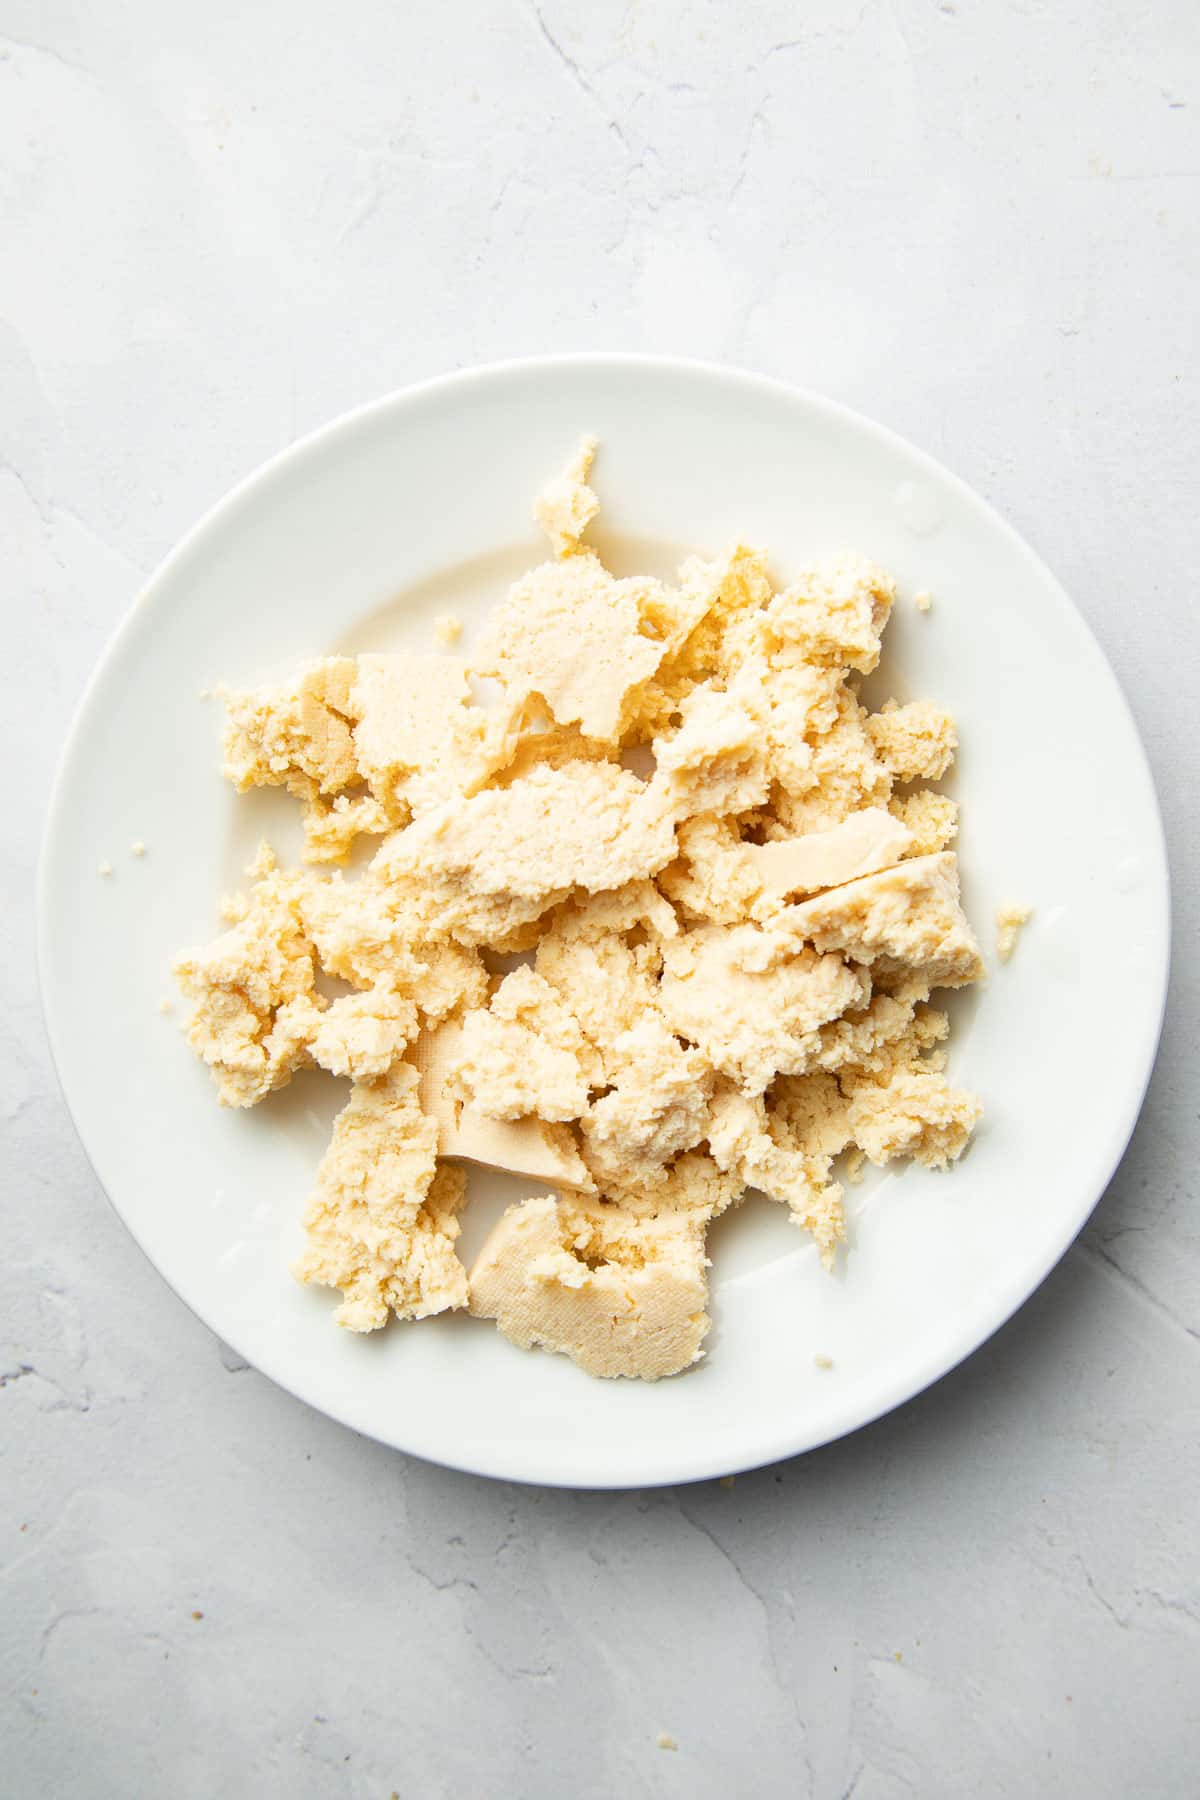 Crumbled super firm tofu that's been frozen and thawed on a plate.